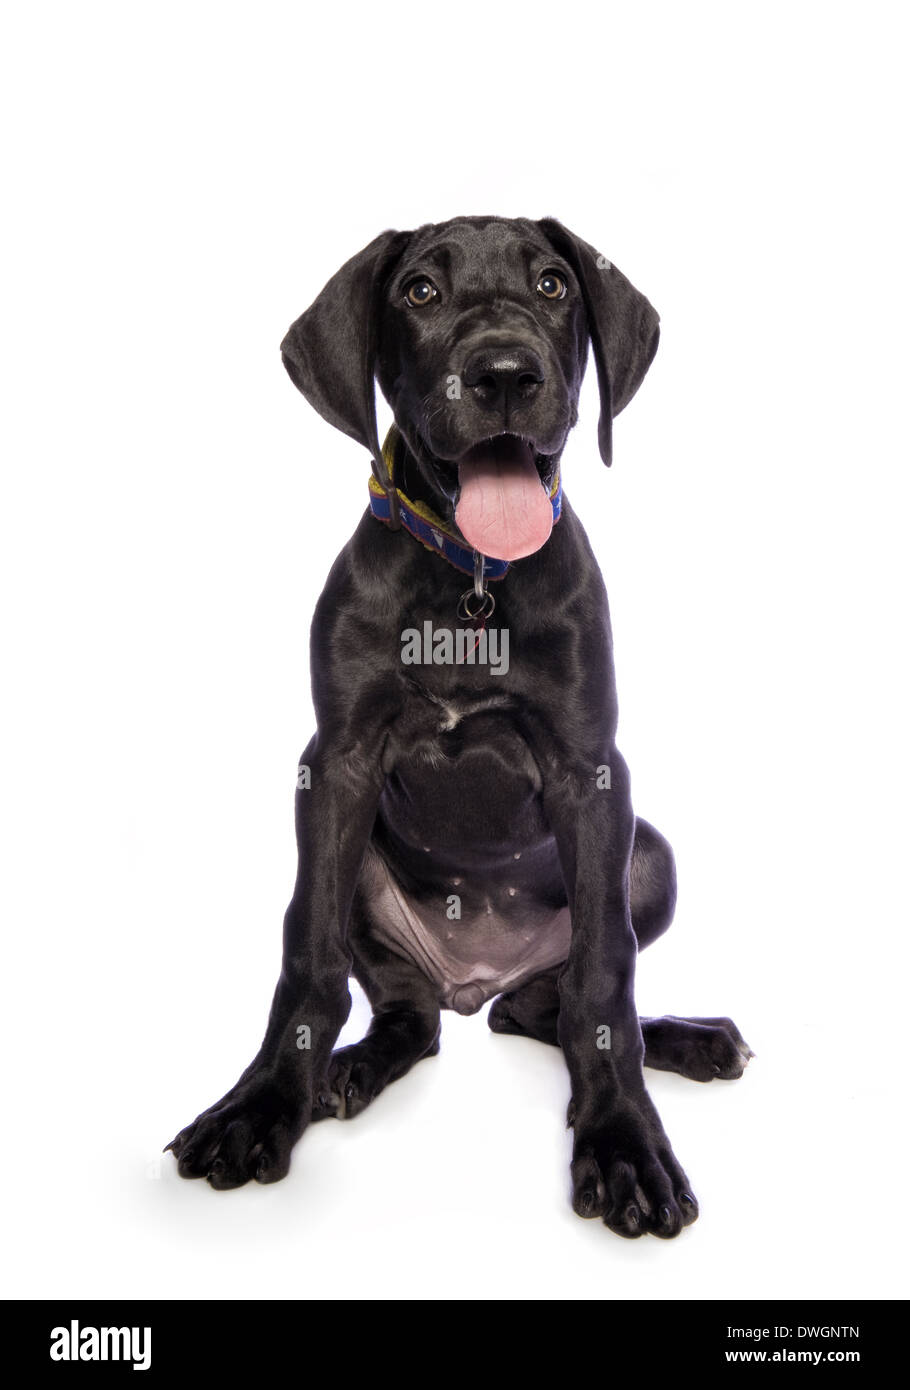 Adorable black Great Dane puppy isolated on white background Stock Photo